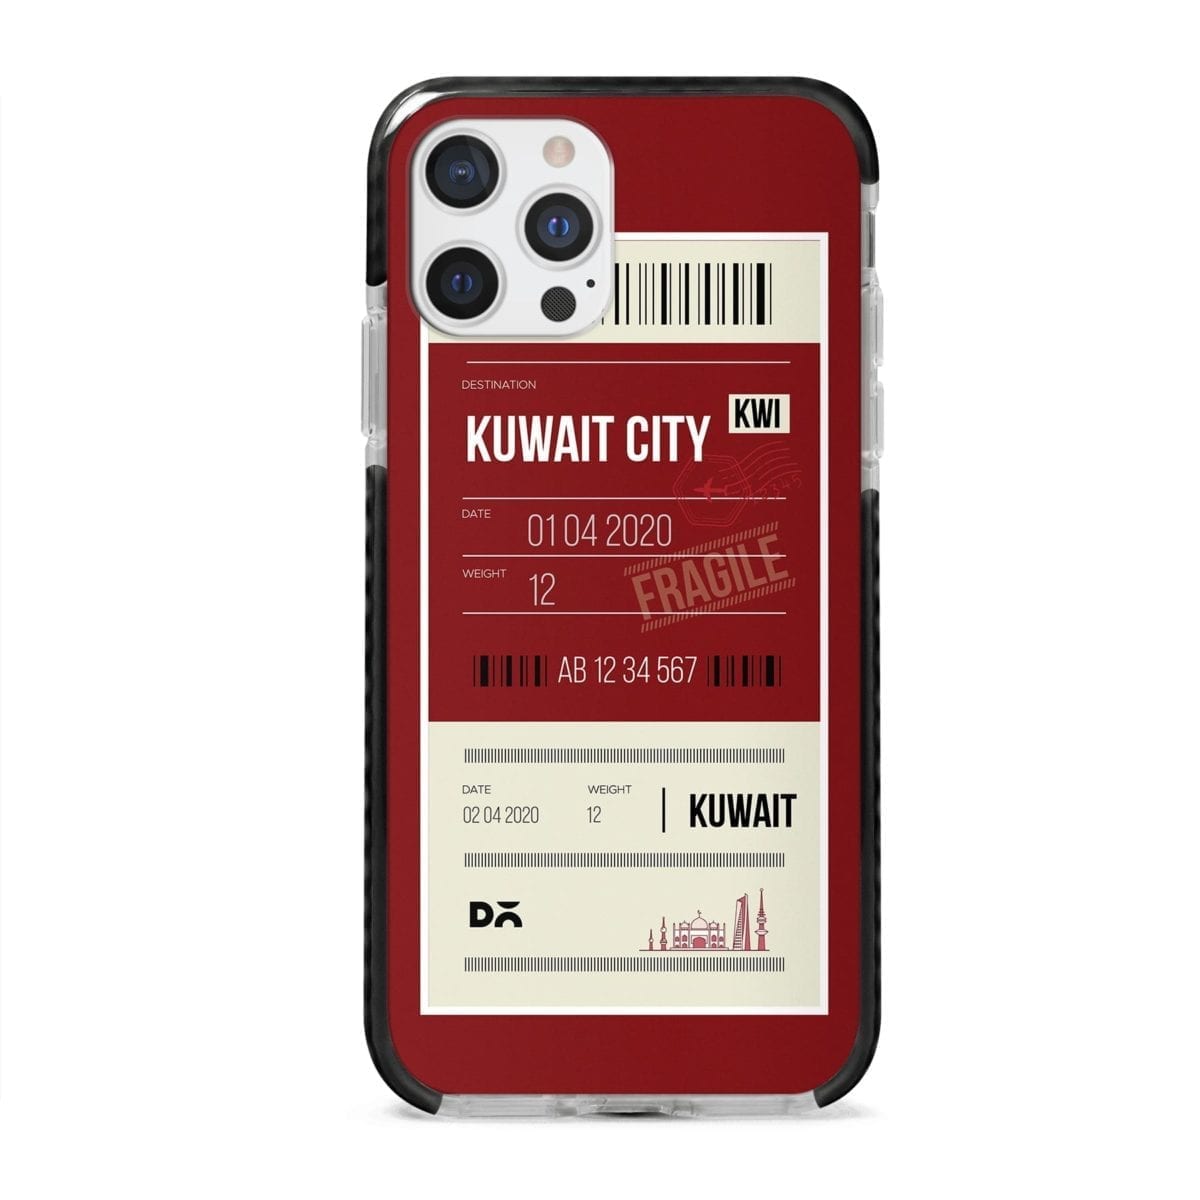 Kuwait City Stride Case Cover for Apple iPhone 12 Pro and Apple iPhone 12 Pro Max with great design and shock proof | Klippik | Online Shopping | Kuwait UAE Saudi